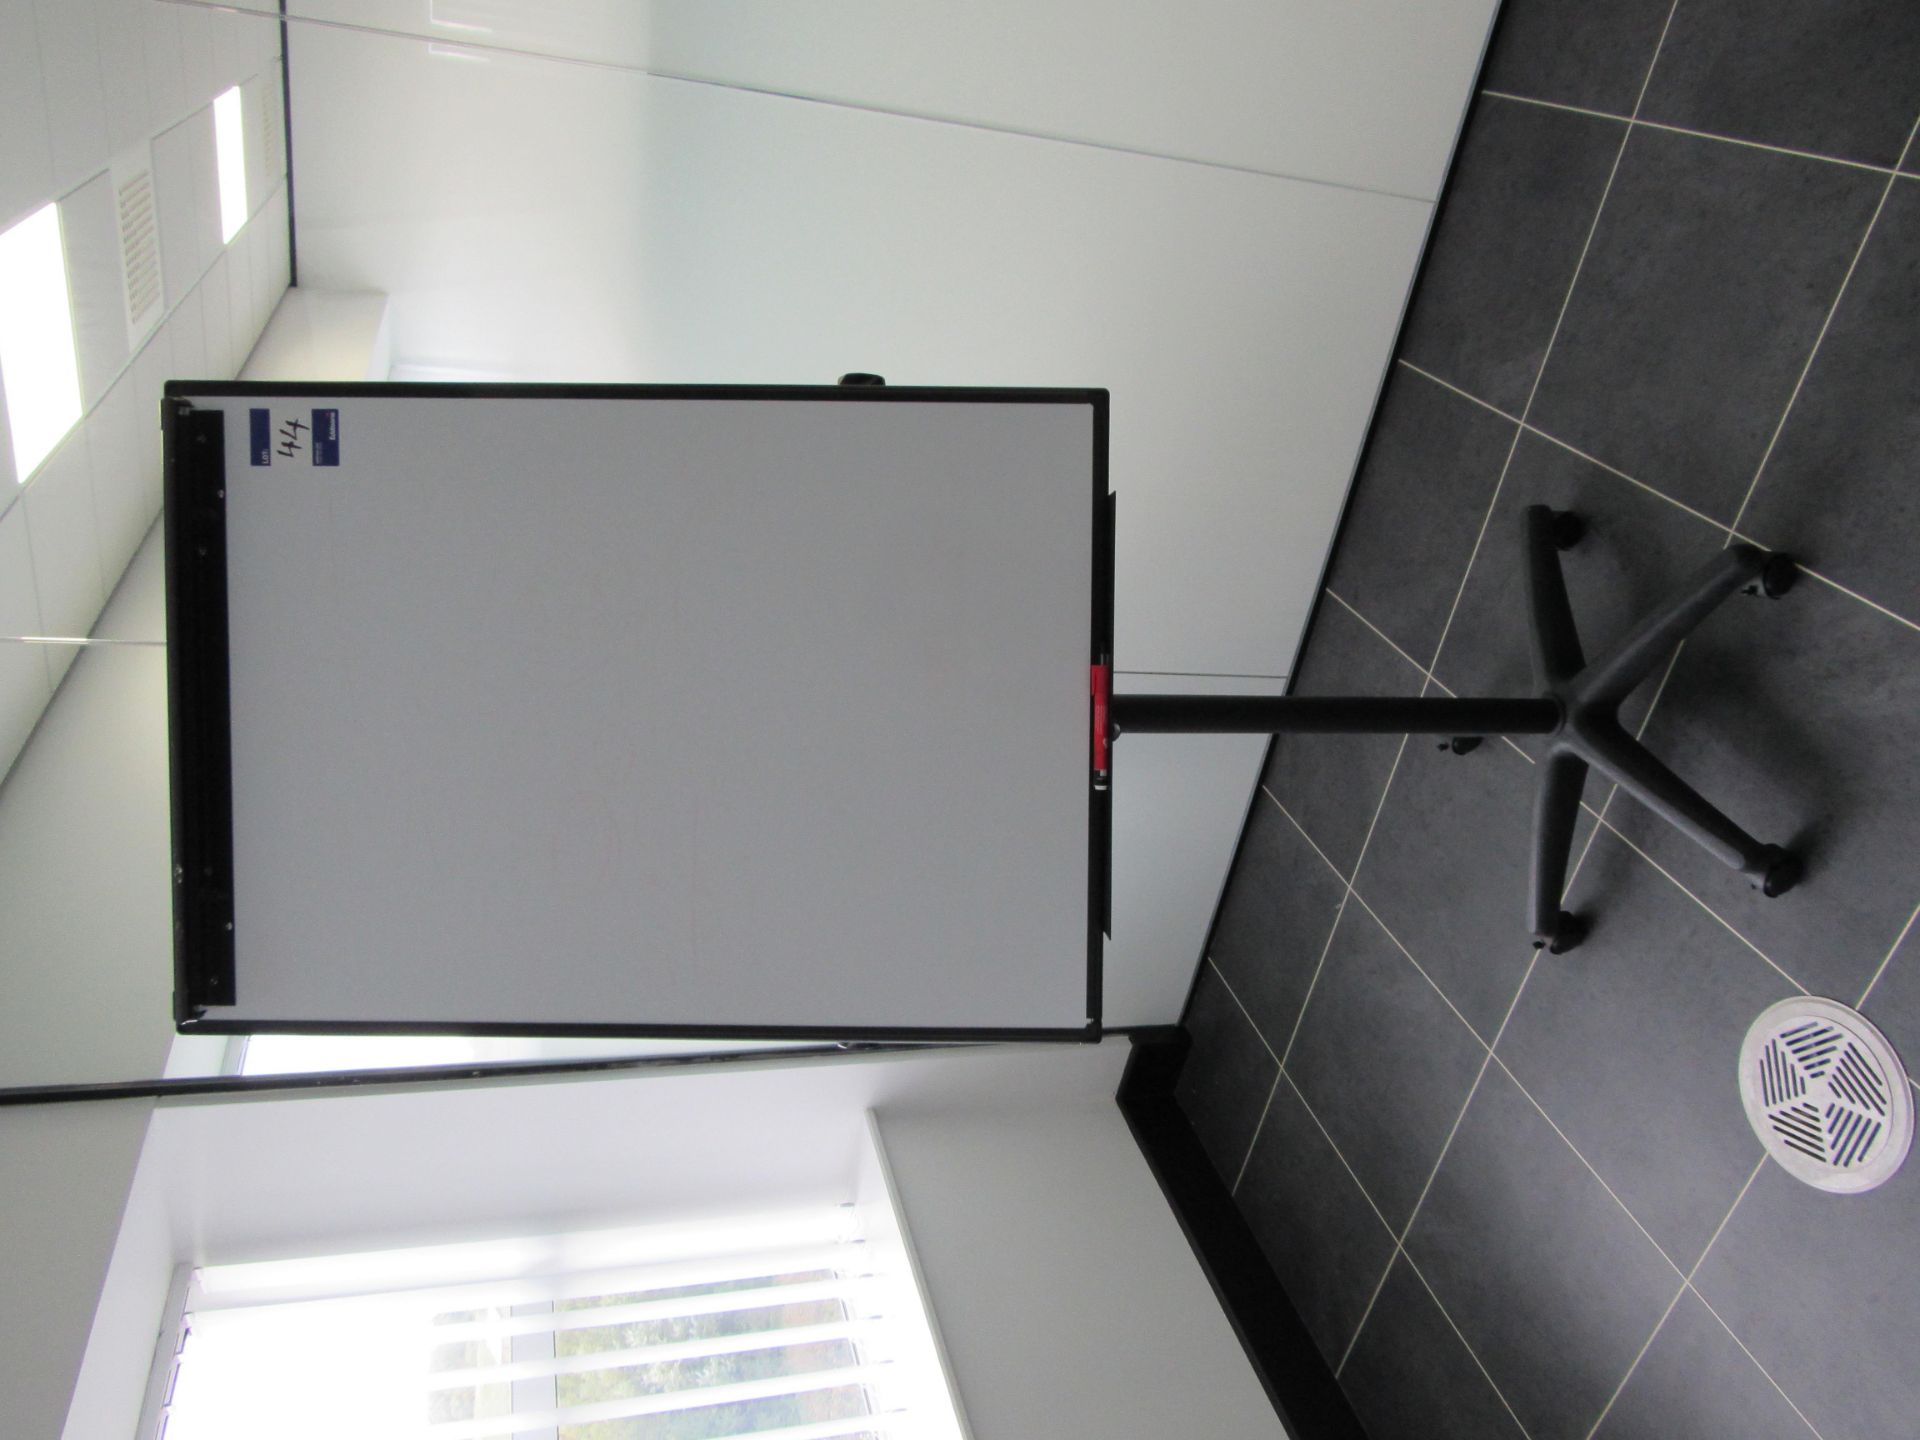 Mobile Flip Chart Stand - Image 2 of 2